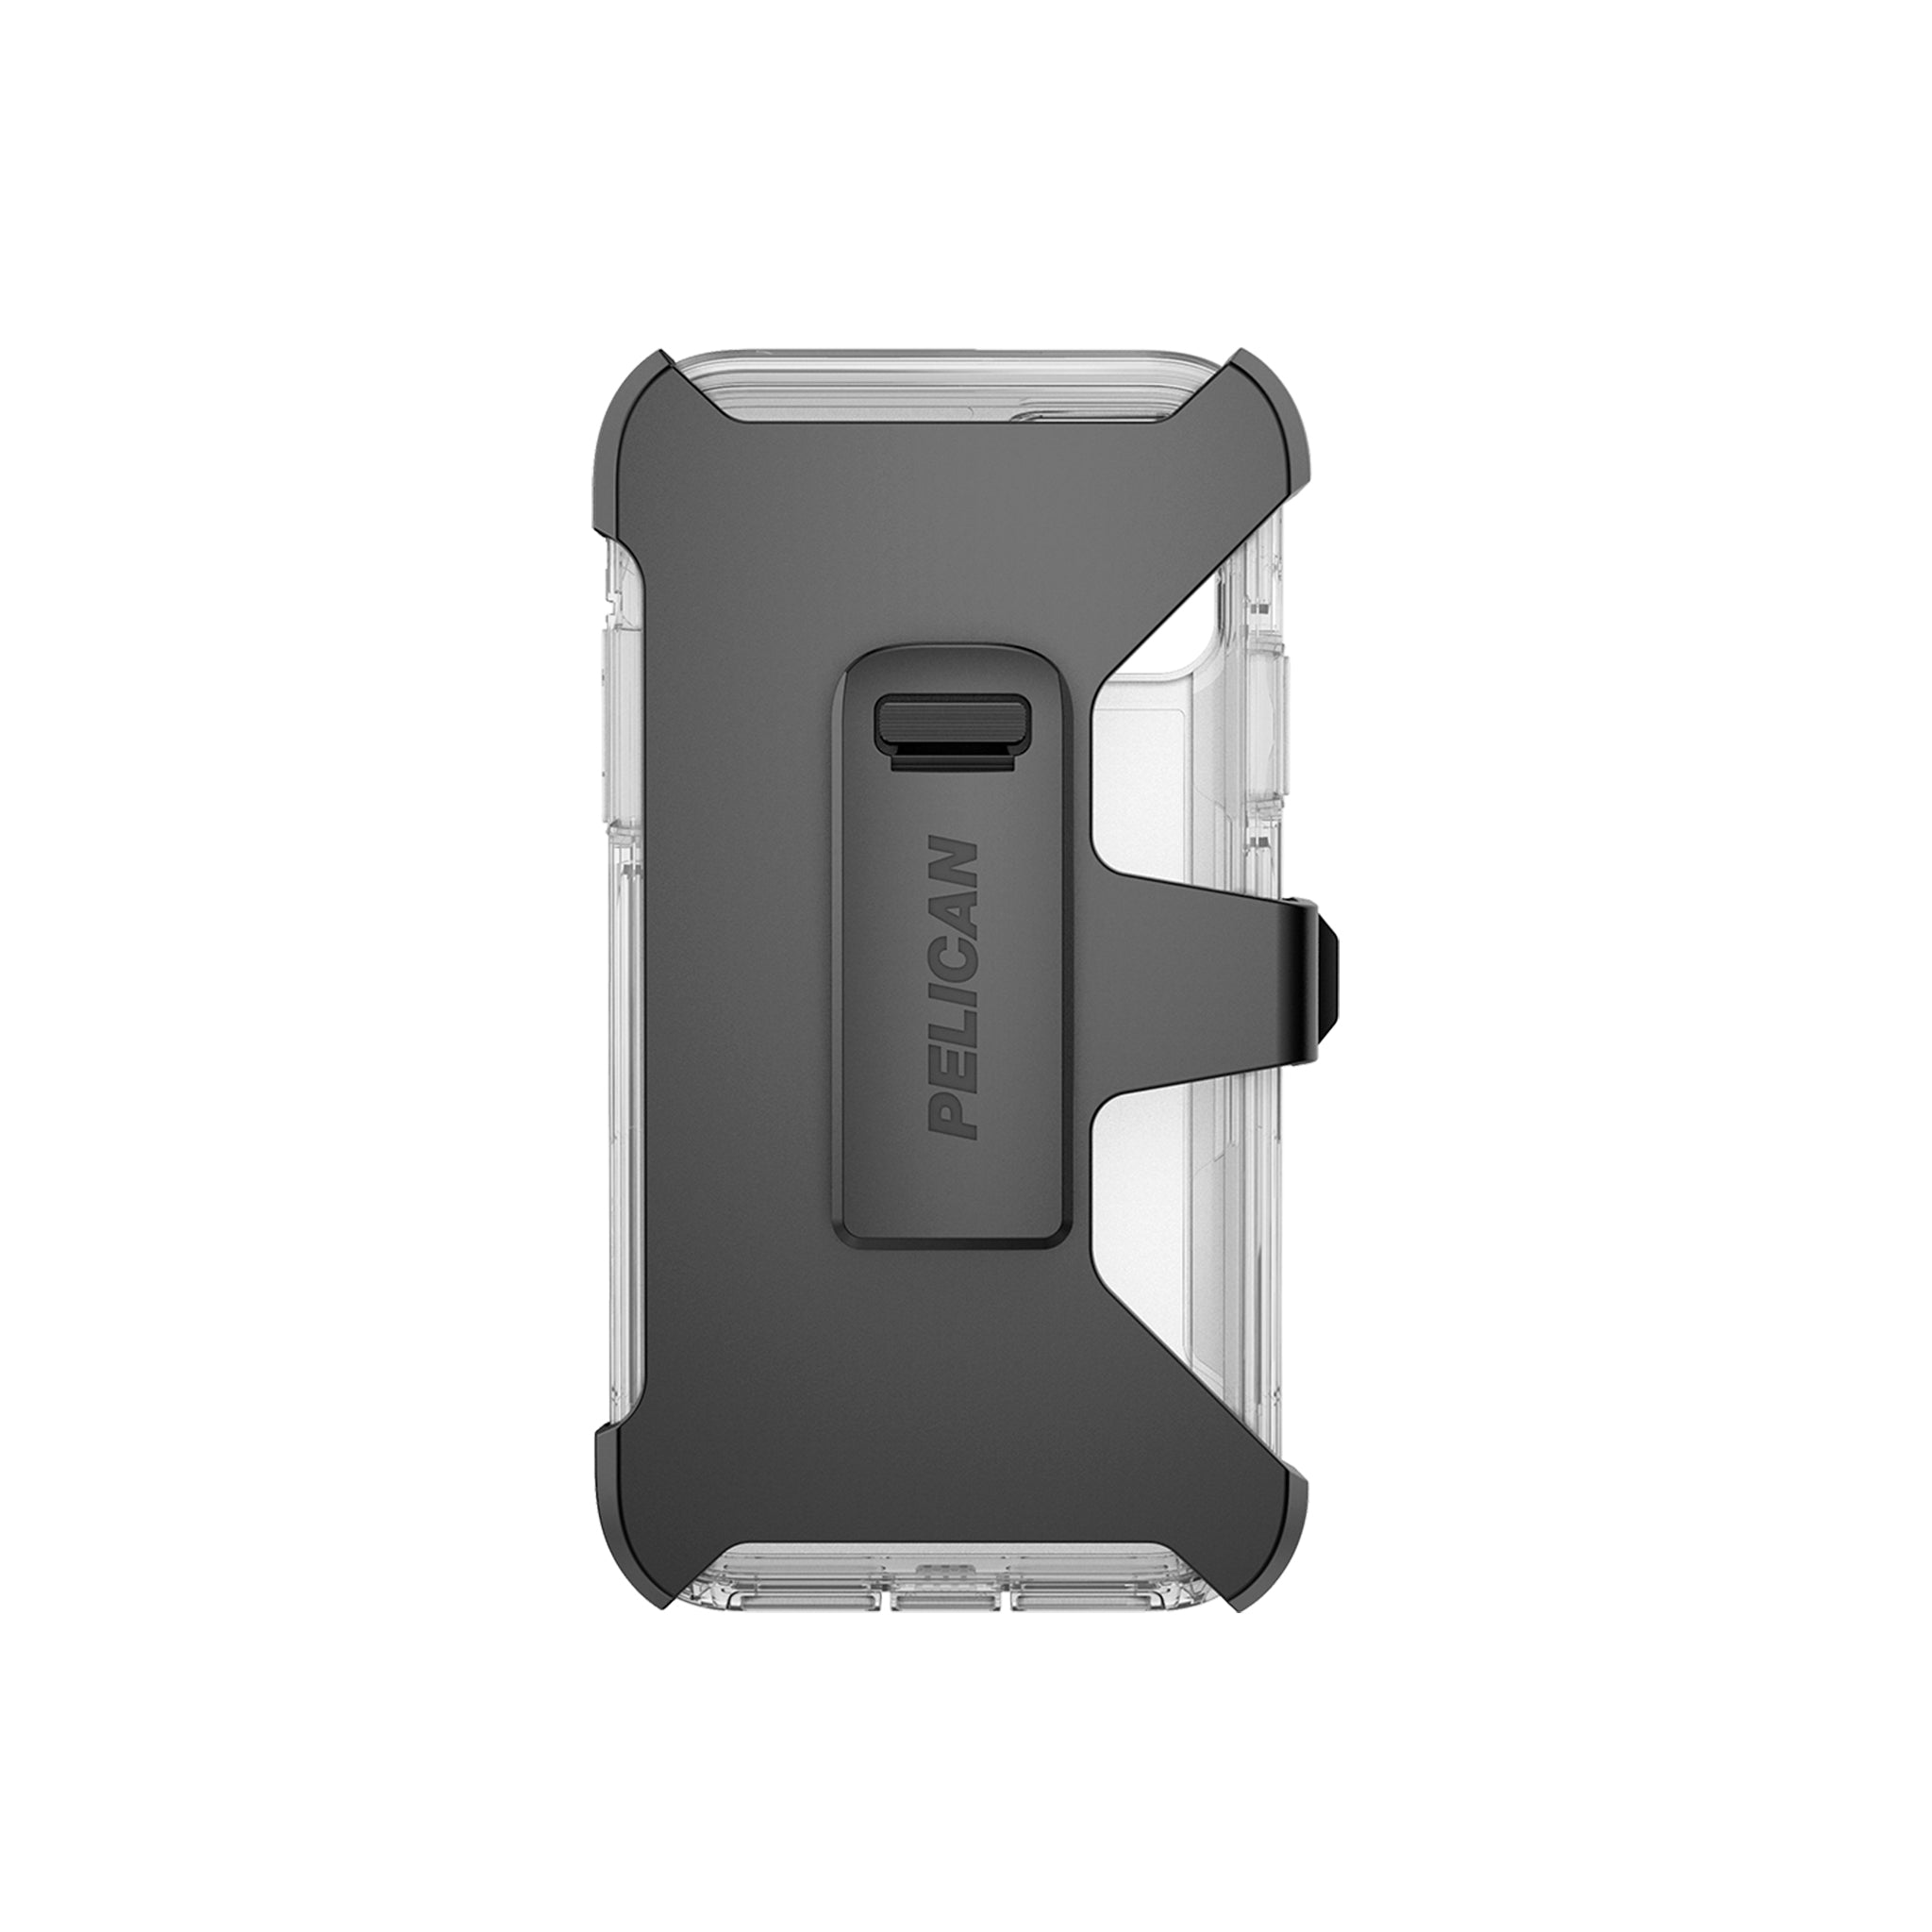 Pelican - Voyager Case For Apple iPhone 11 / Xr - Clear